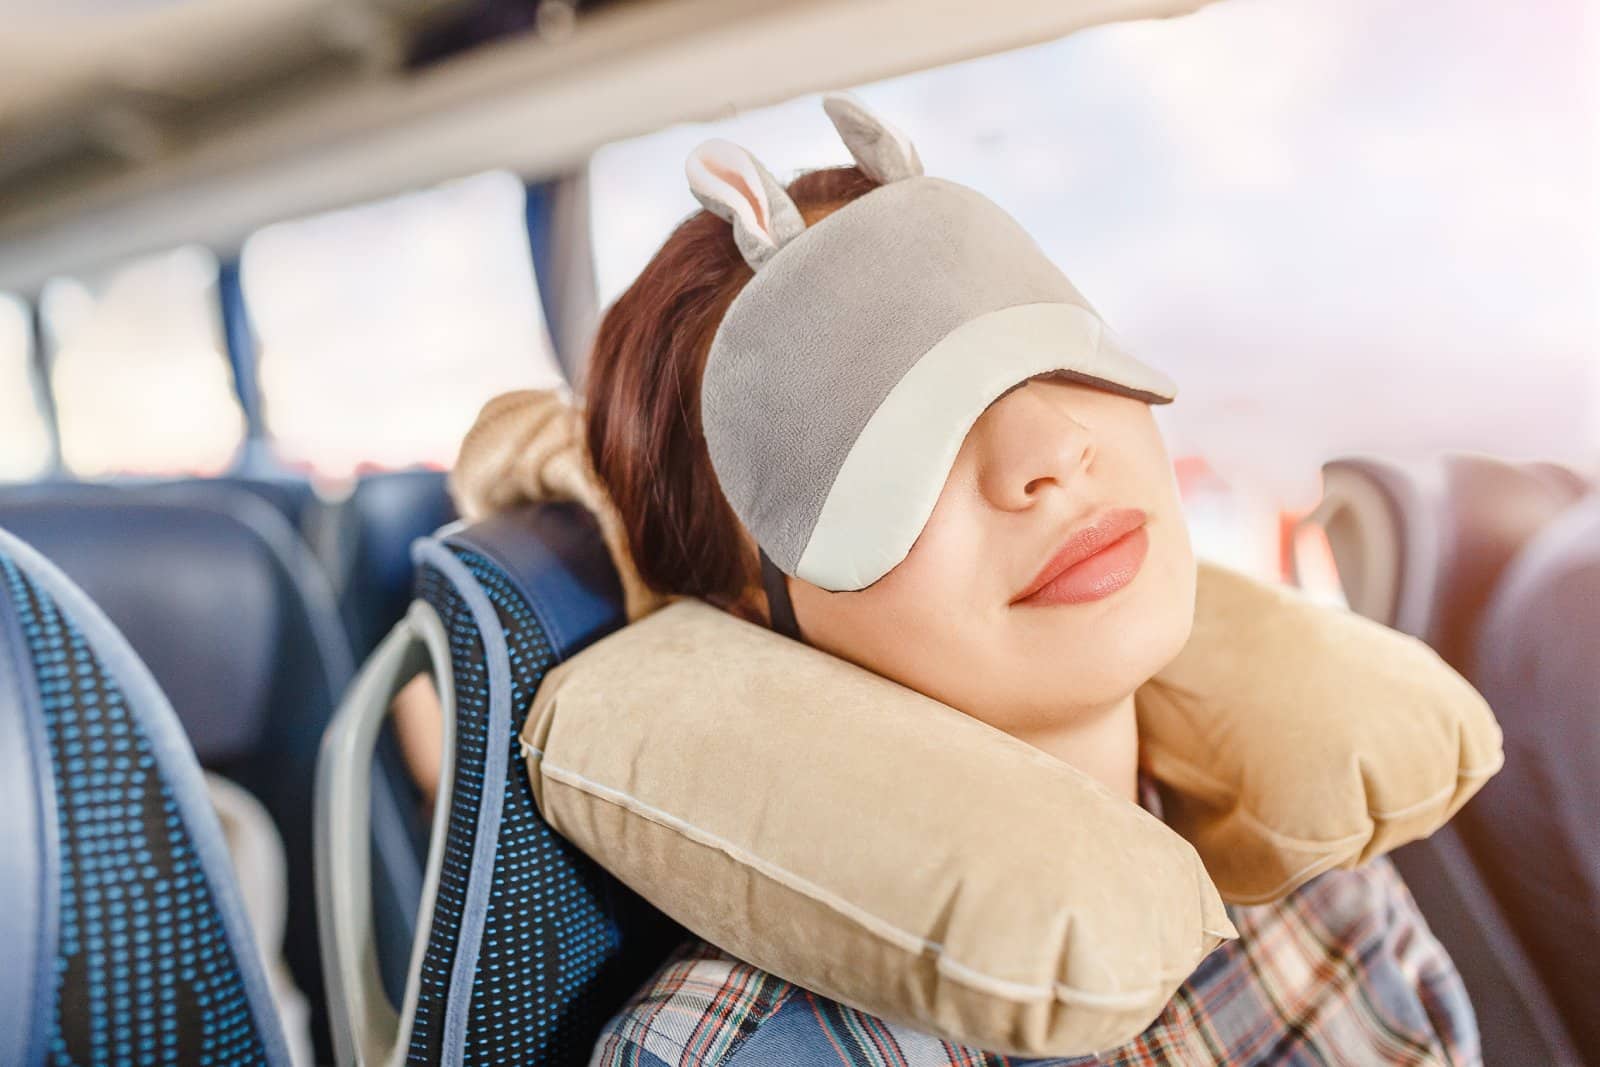 <p>Invest in a premium travel pillow and sleep accessories for comfortable rest during long flights or train rides.</p>